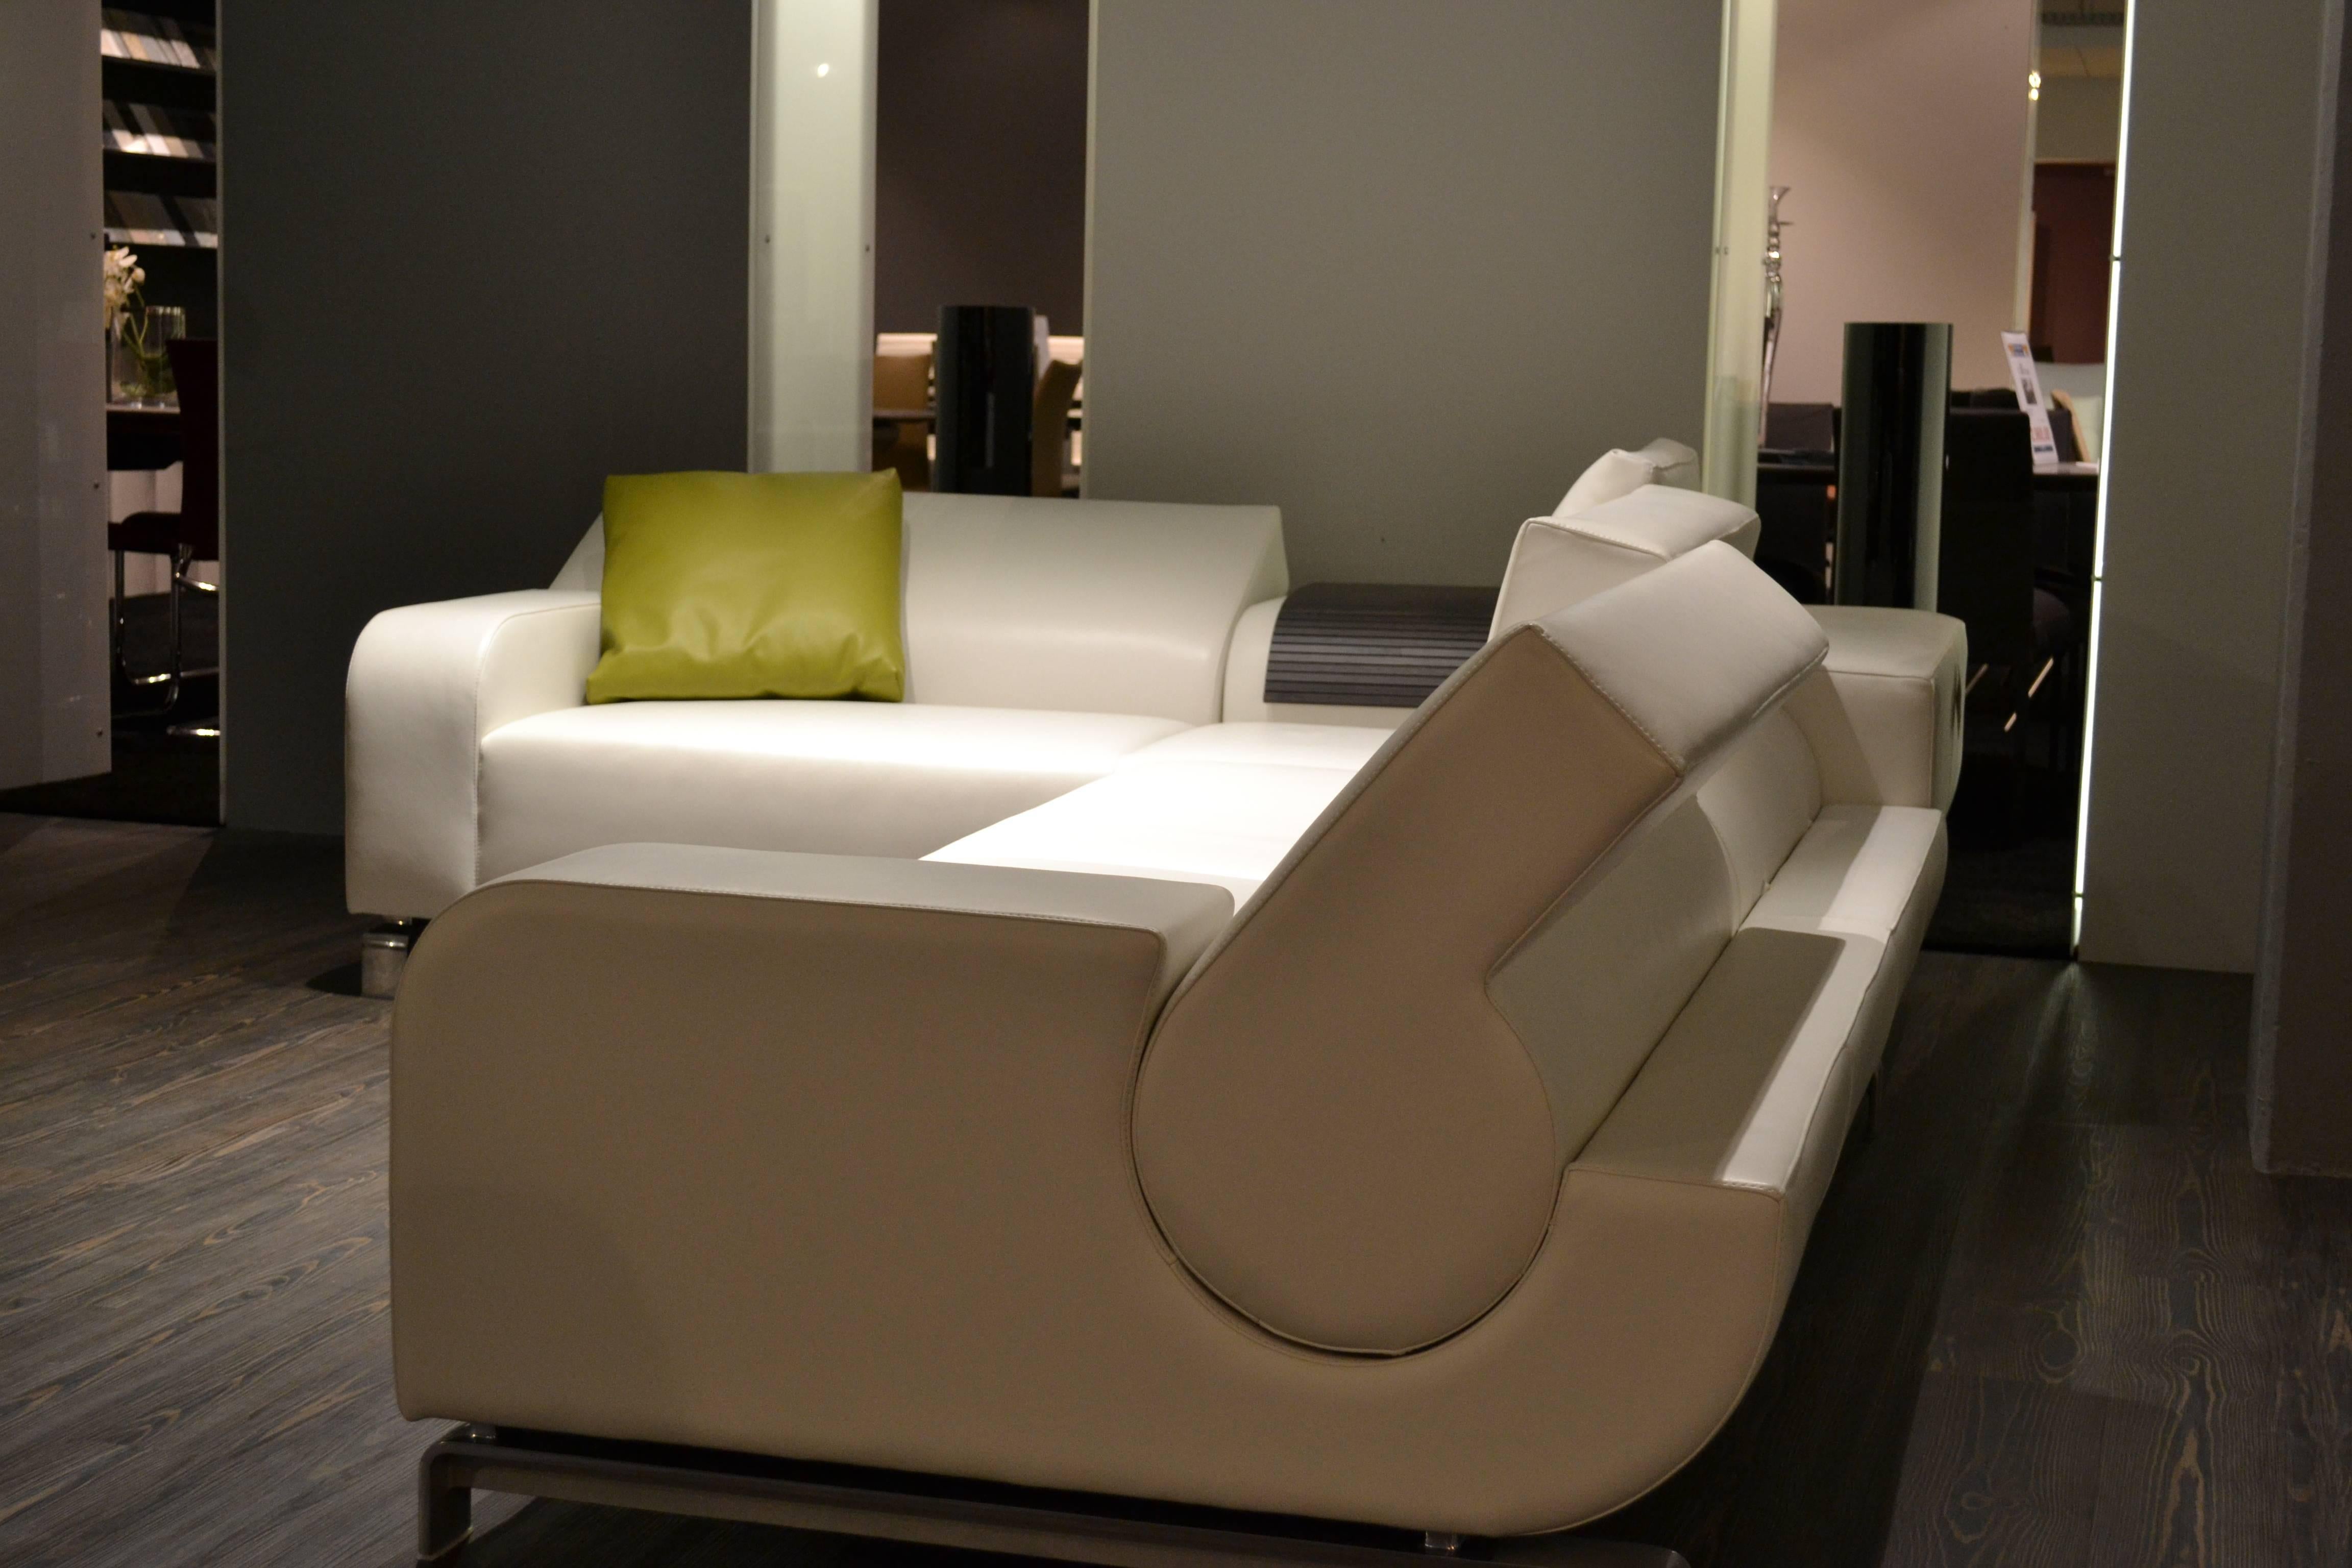 This corner sofa is produced by the long-standing Dutch manufacture Leolux.